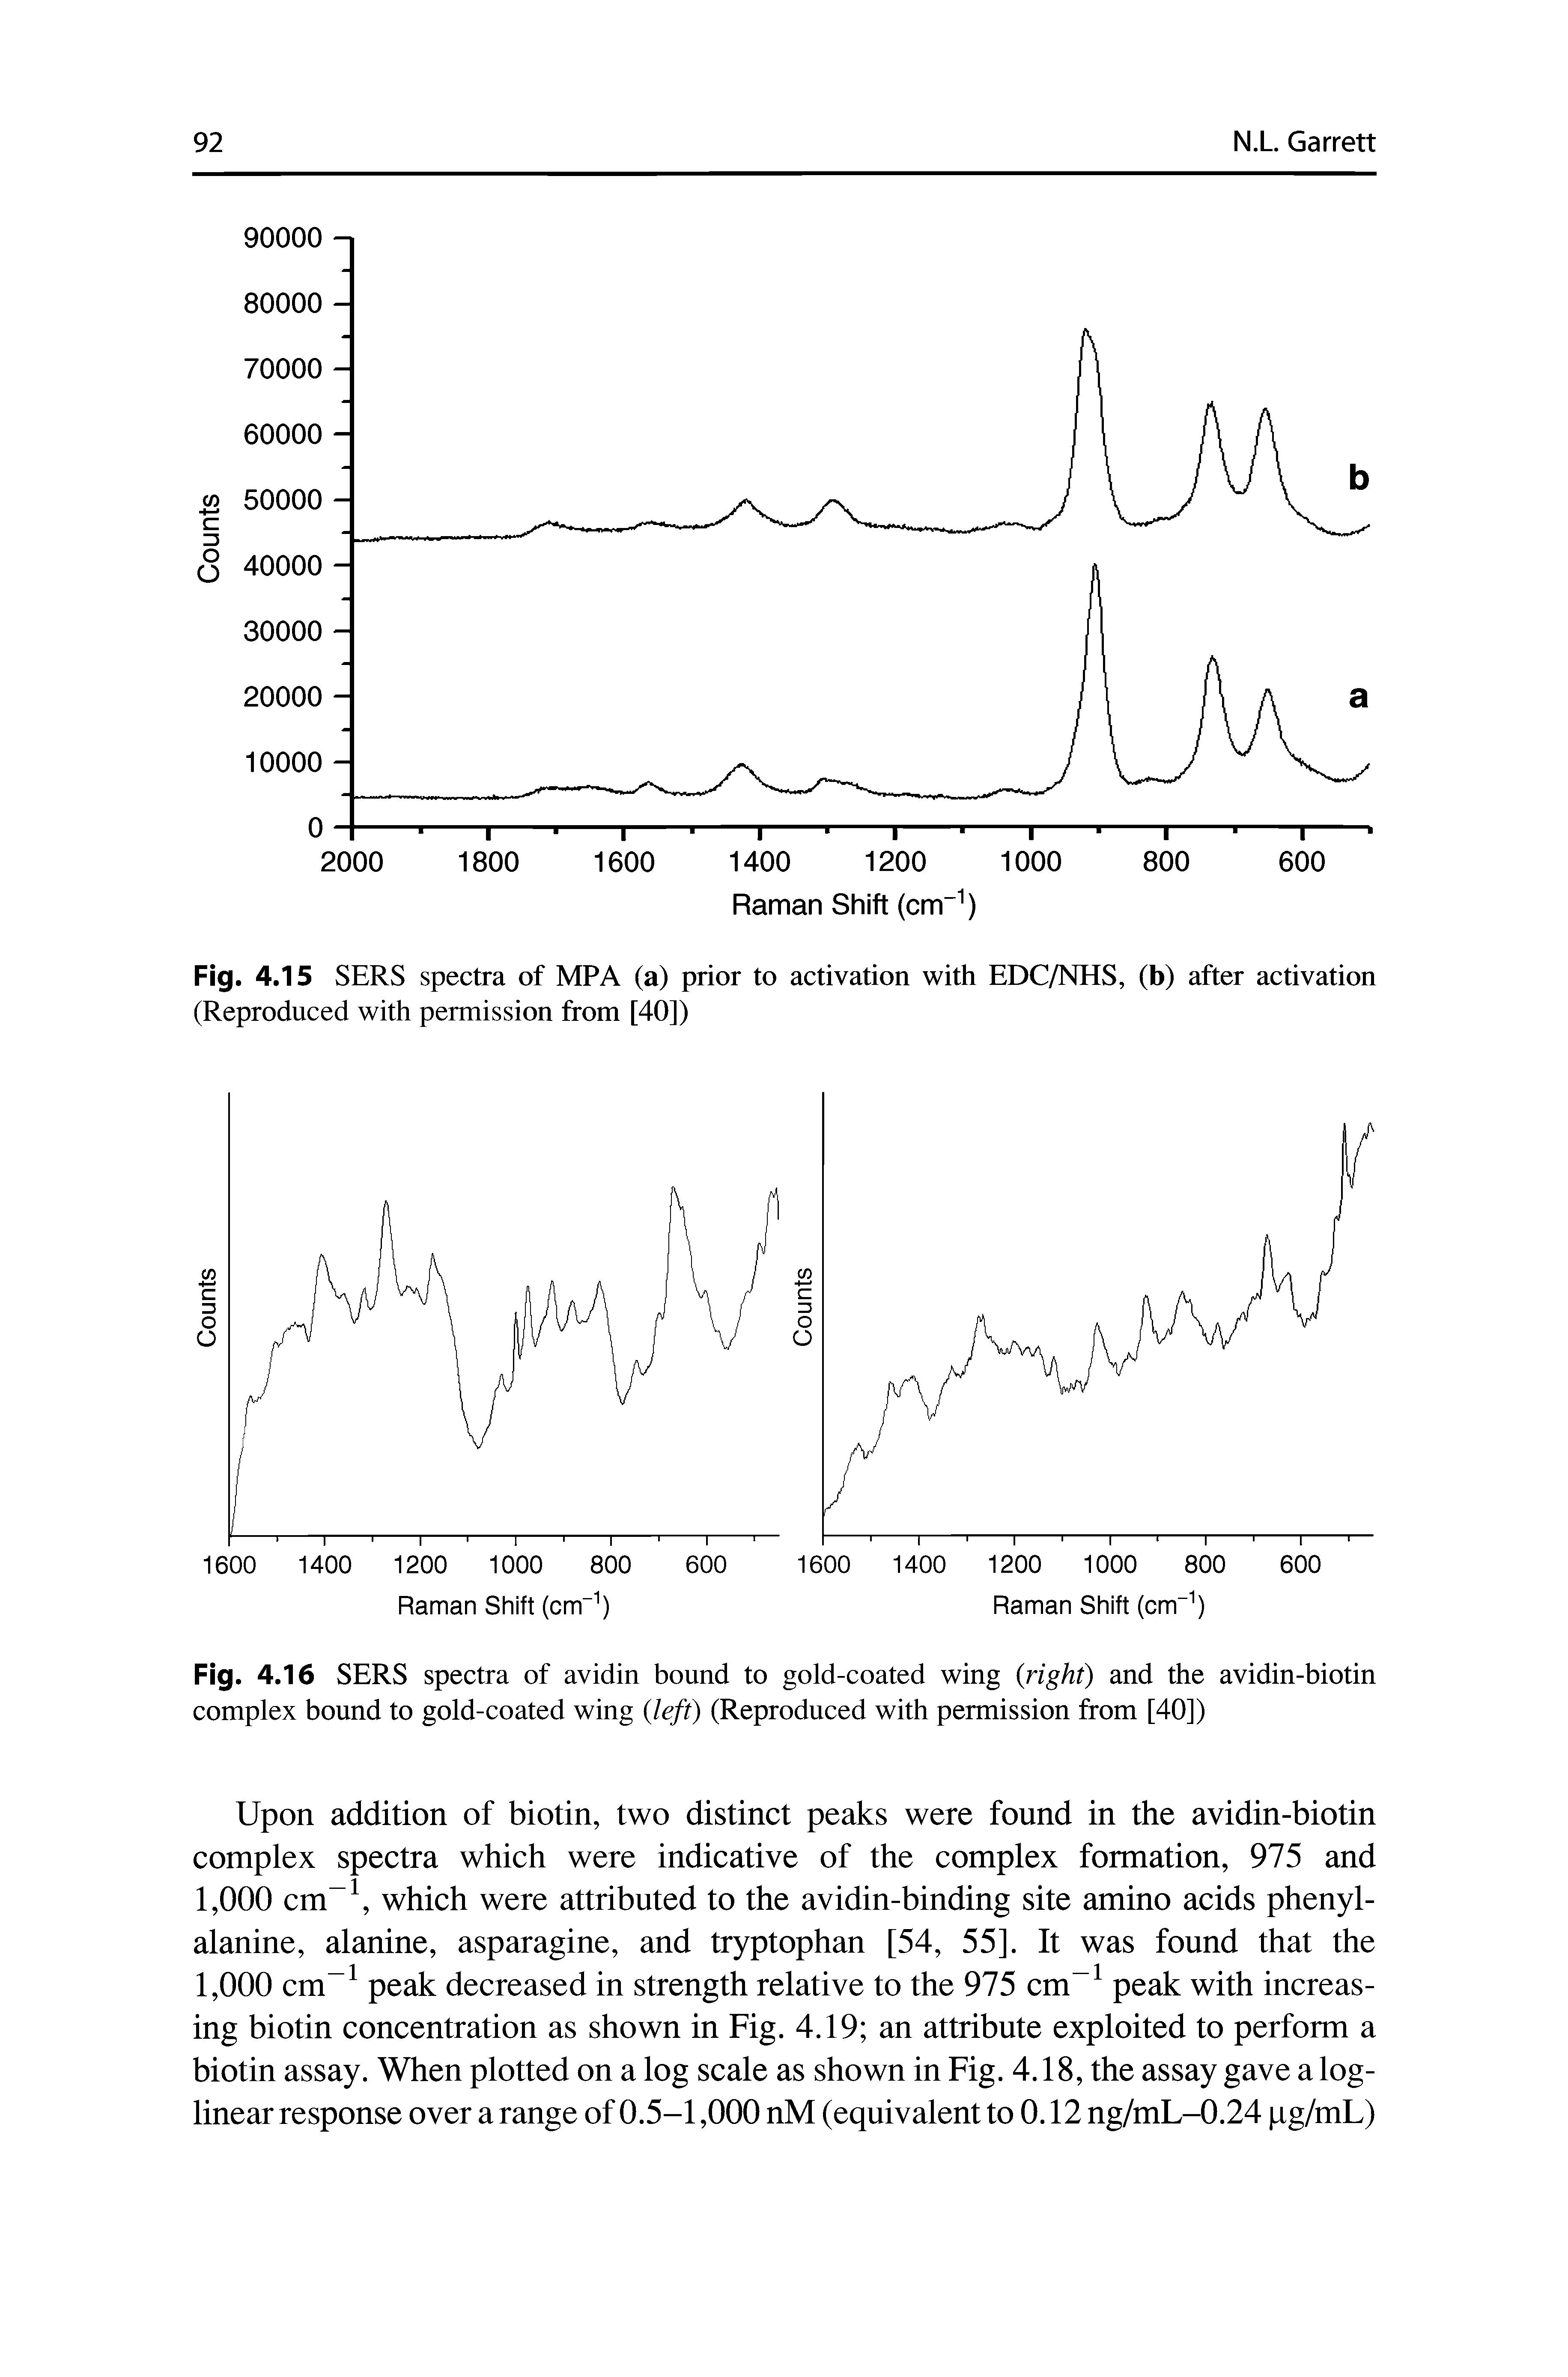 Fig. 4.16 SERS spectra of avidin bound to gold-coated wing right) and the avidin-biotin complex bound to gold-coated wing left) (Reproduced with permission from [40])...